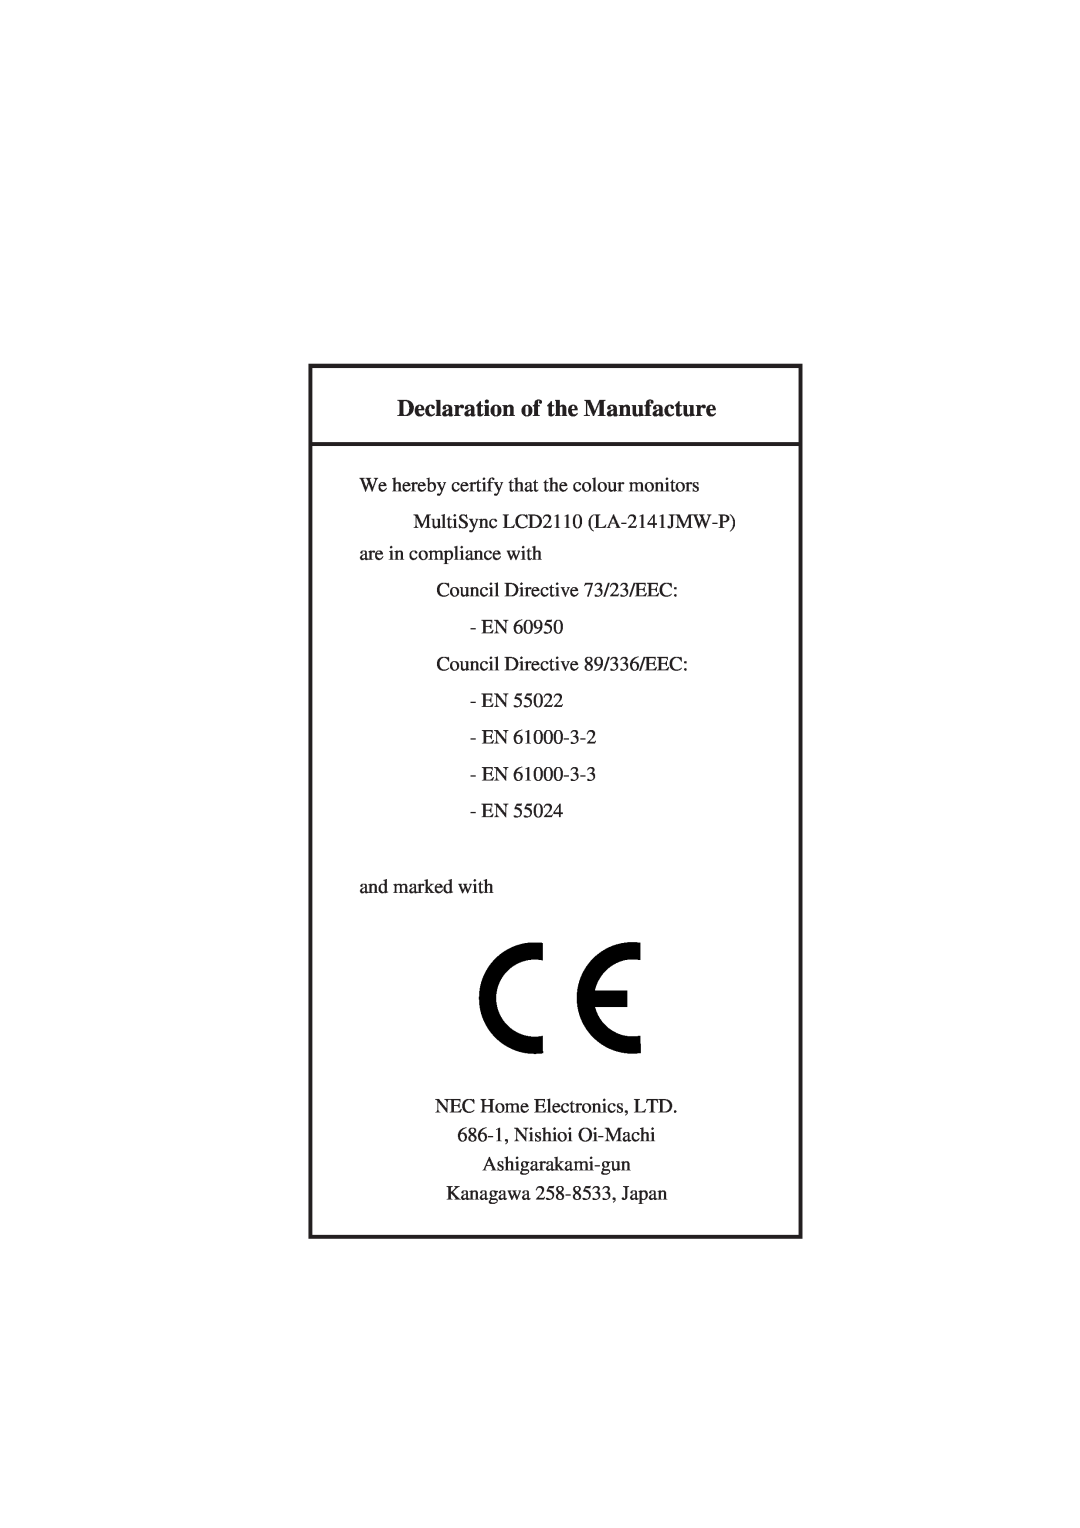 NEC LCD2110 user manual Declaration of the Manufacture, are in compliance with Council Directive 73/23/EEC - EN 